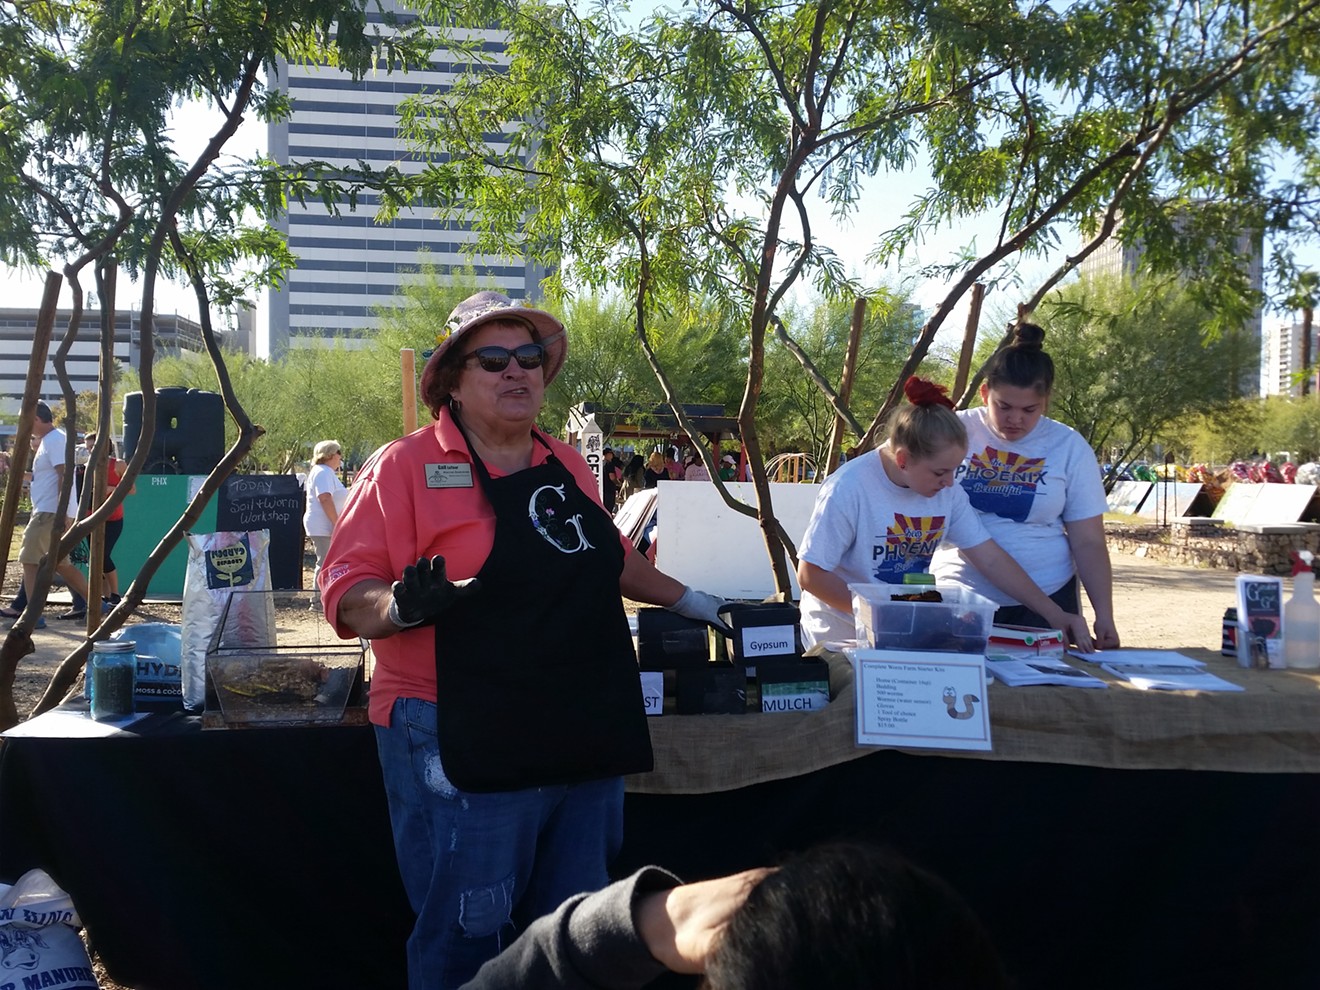 Last October, Keep Phoenix Beautiful launched its series of garden workshops at PHX Renews in midtown Phoenix. Pictured is Gail Latour leading the Wildflower Workshop, one of the classes in that series. Participants learned about soil care and worm farms.